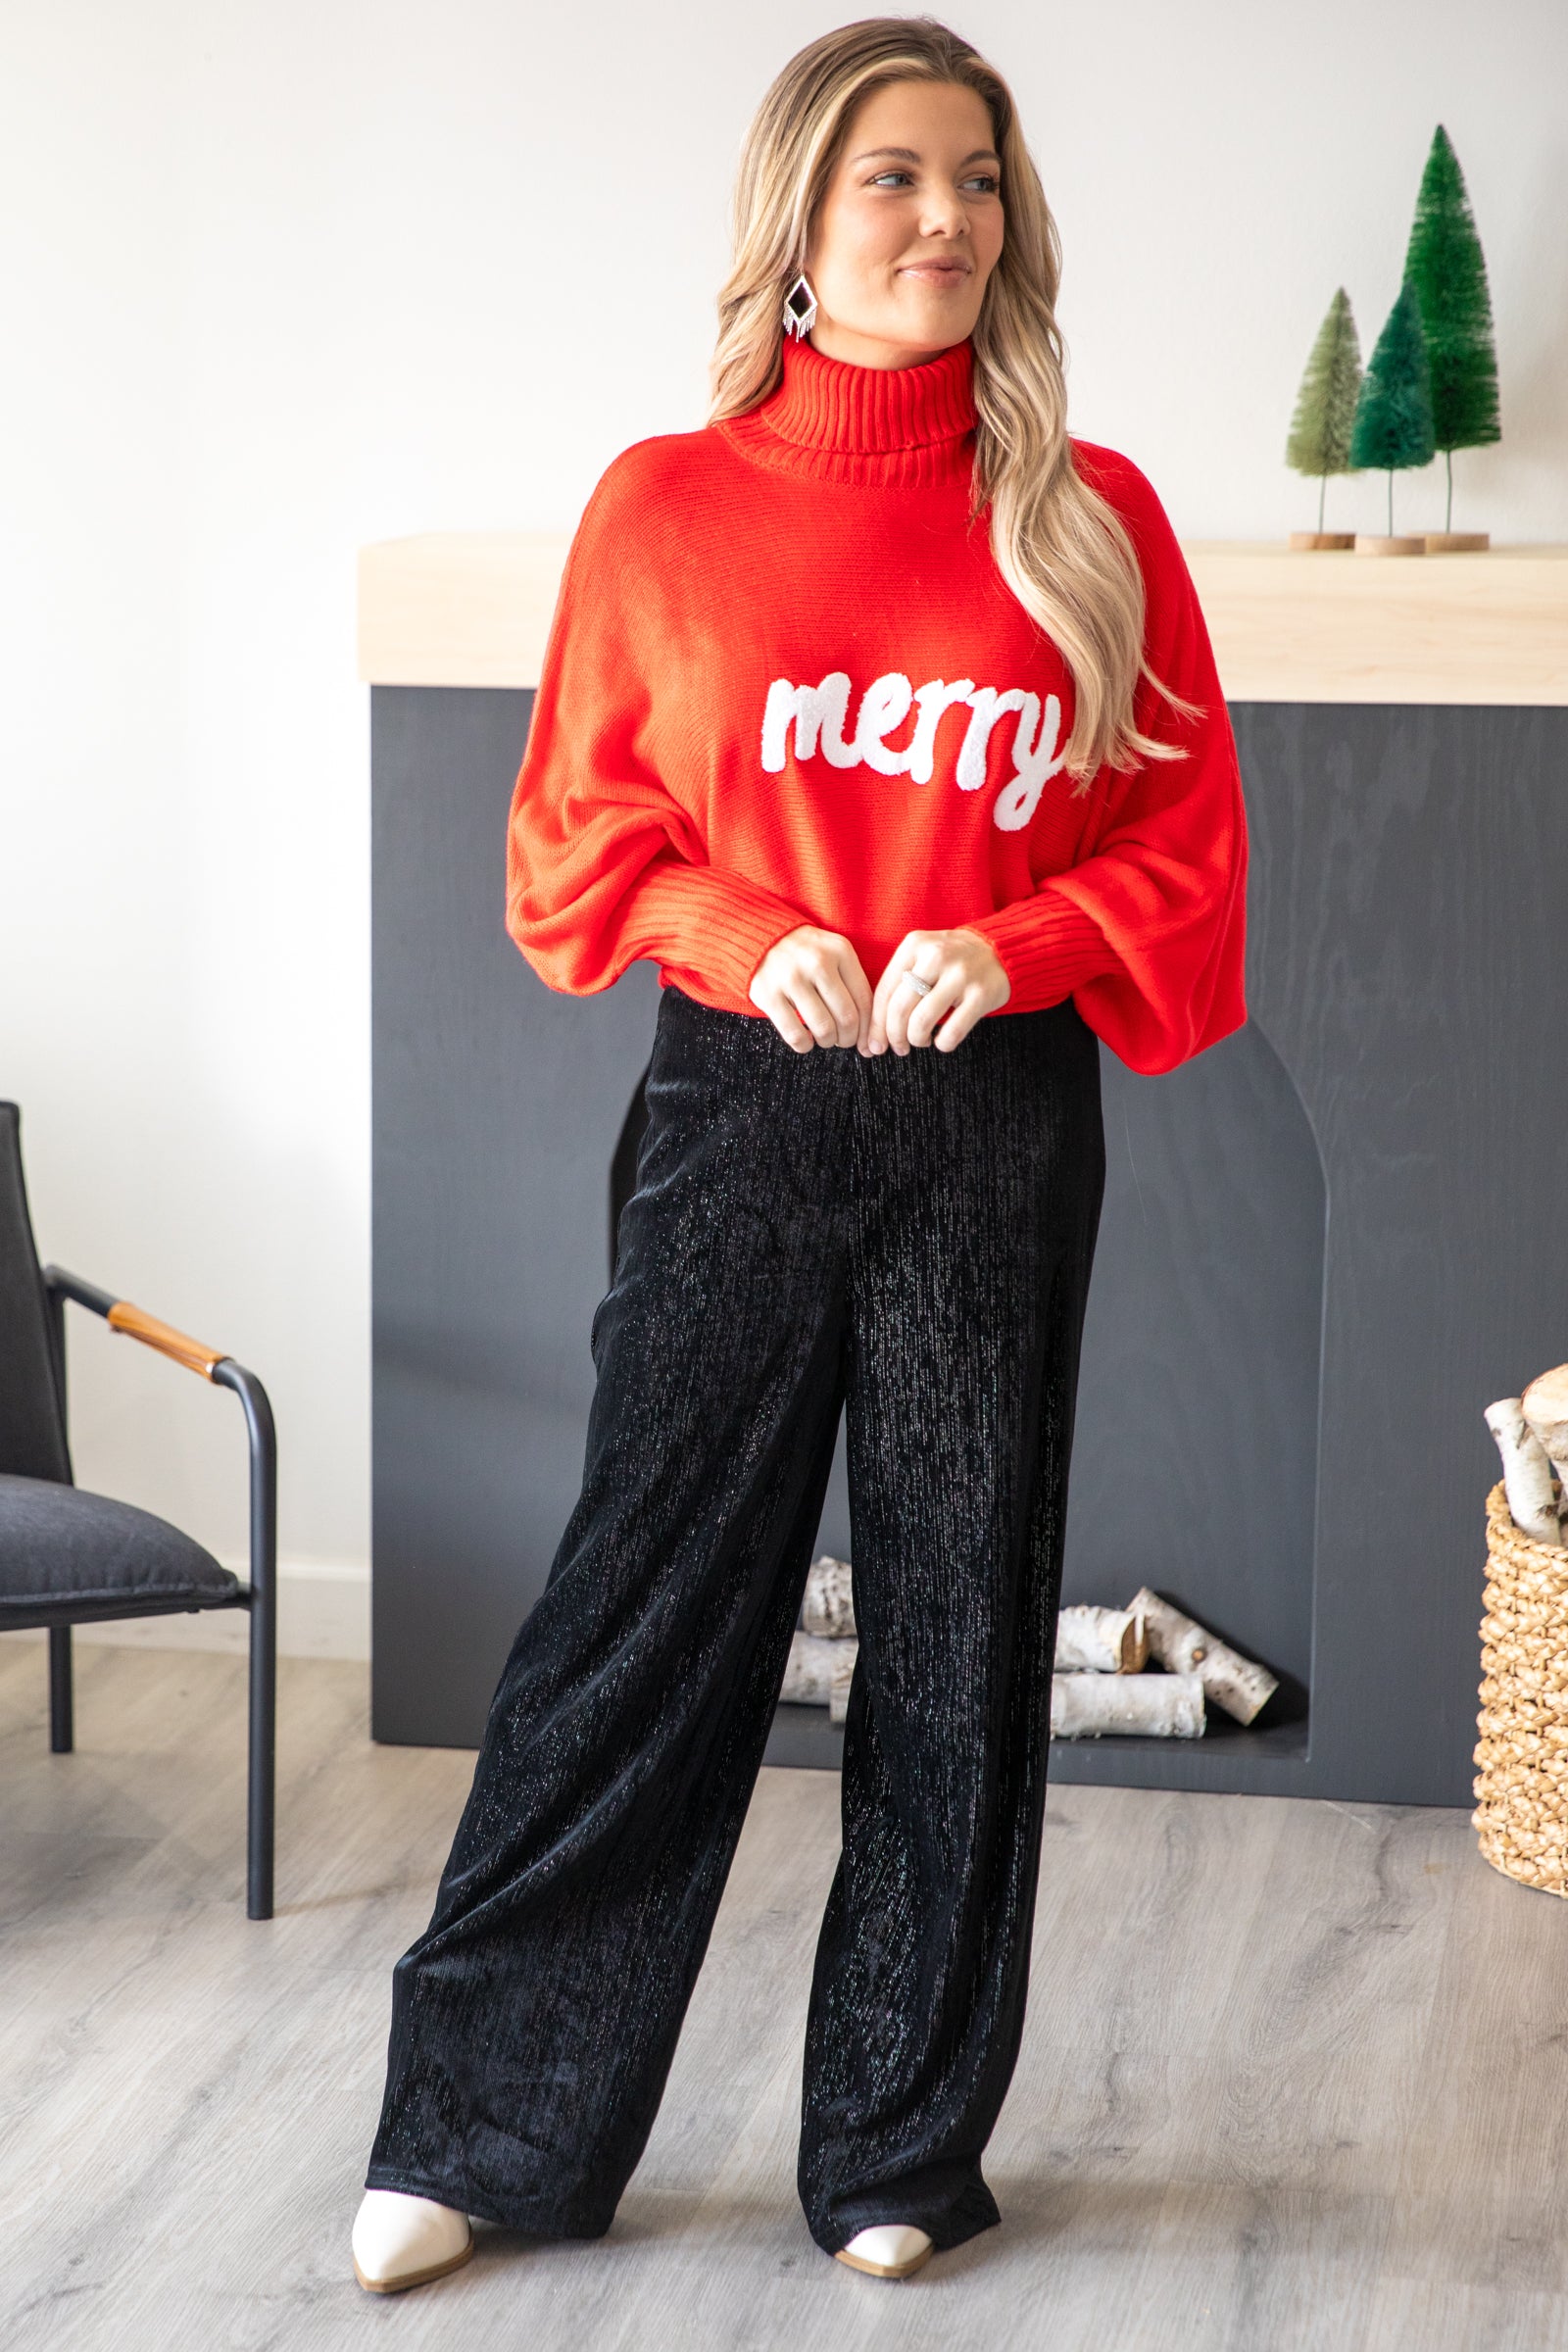 Red Merry Turtleneck Sweater